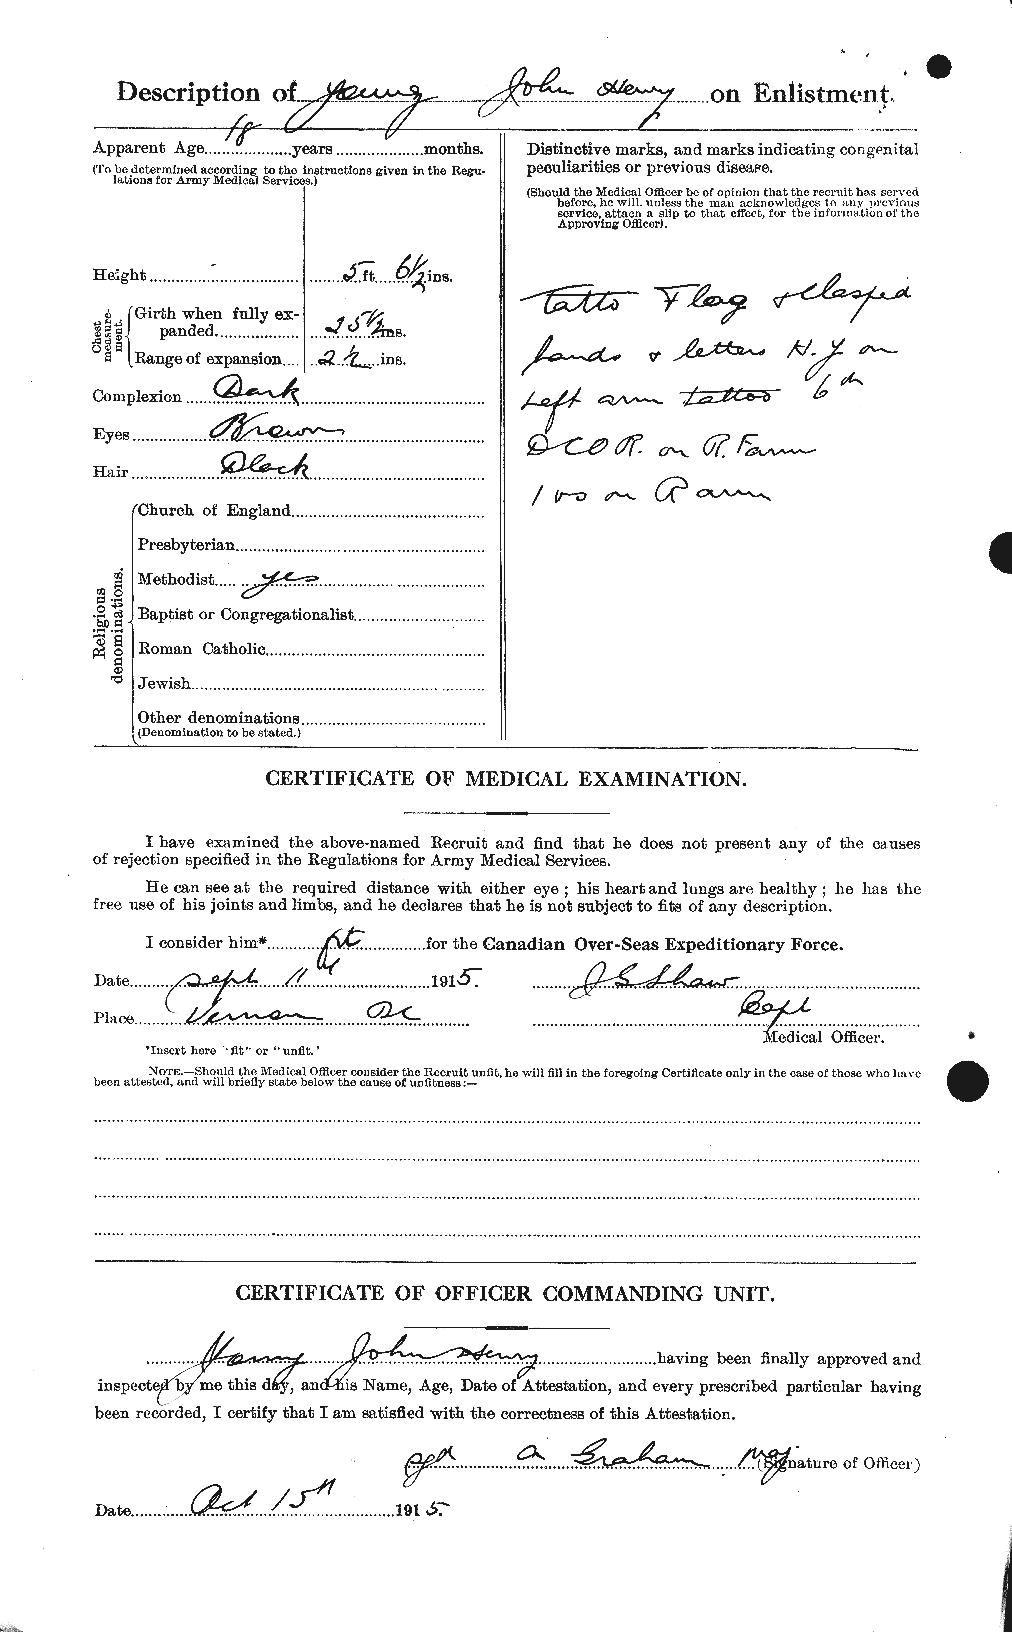 Personnel Records of the First World War - CEF 690769b